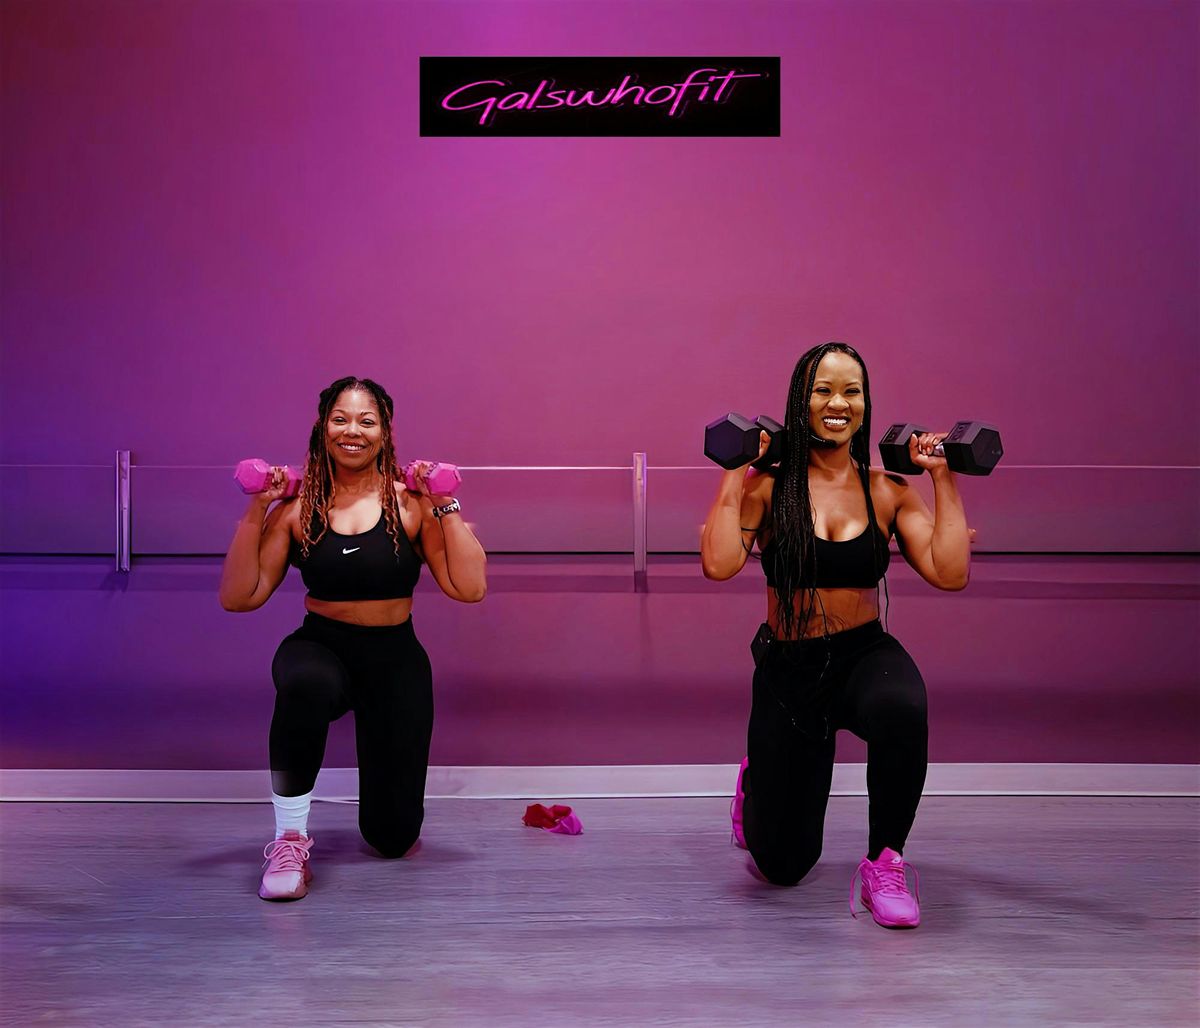 Galswhofit Build The Body workout  experience.